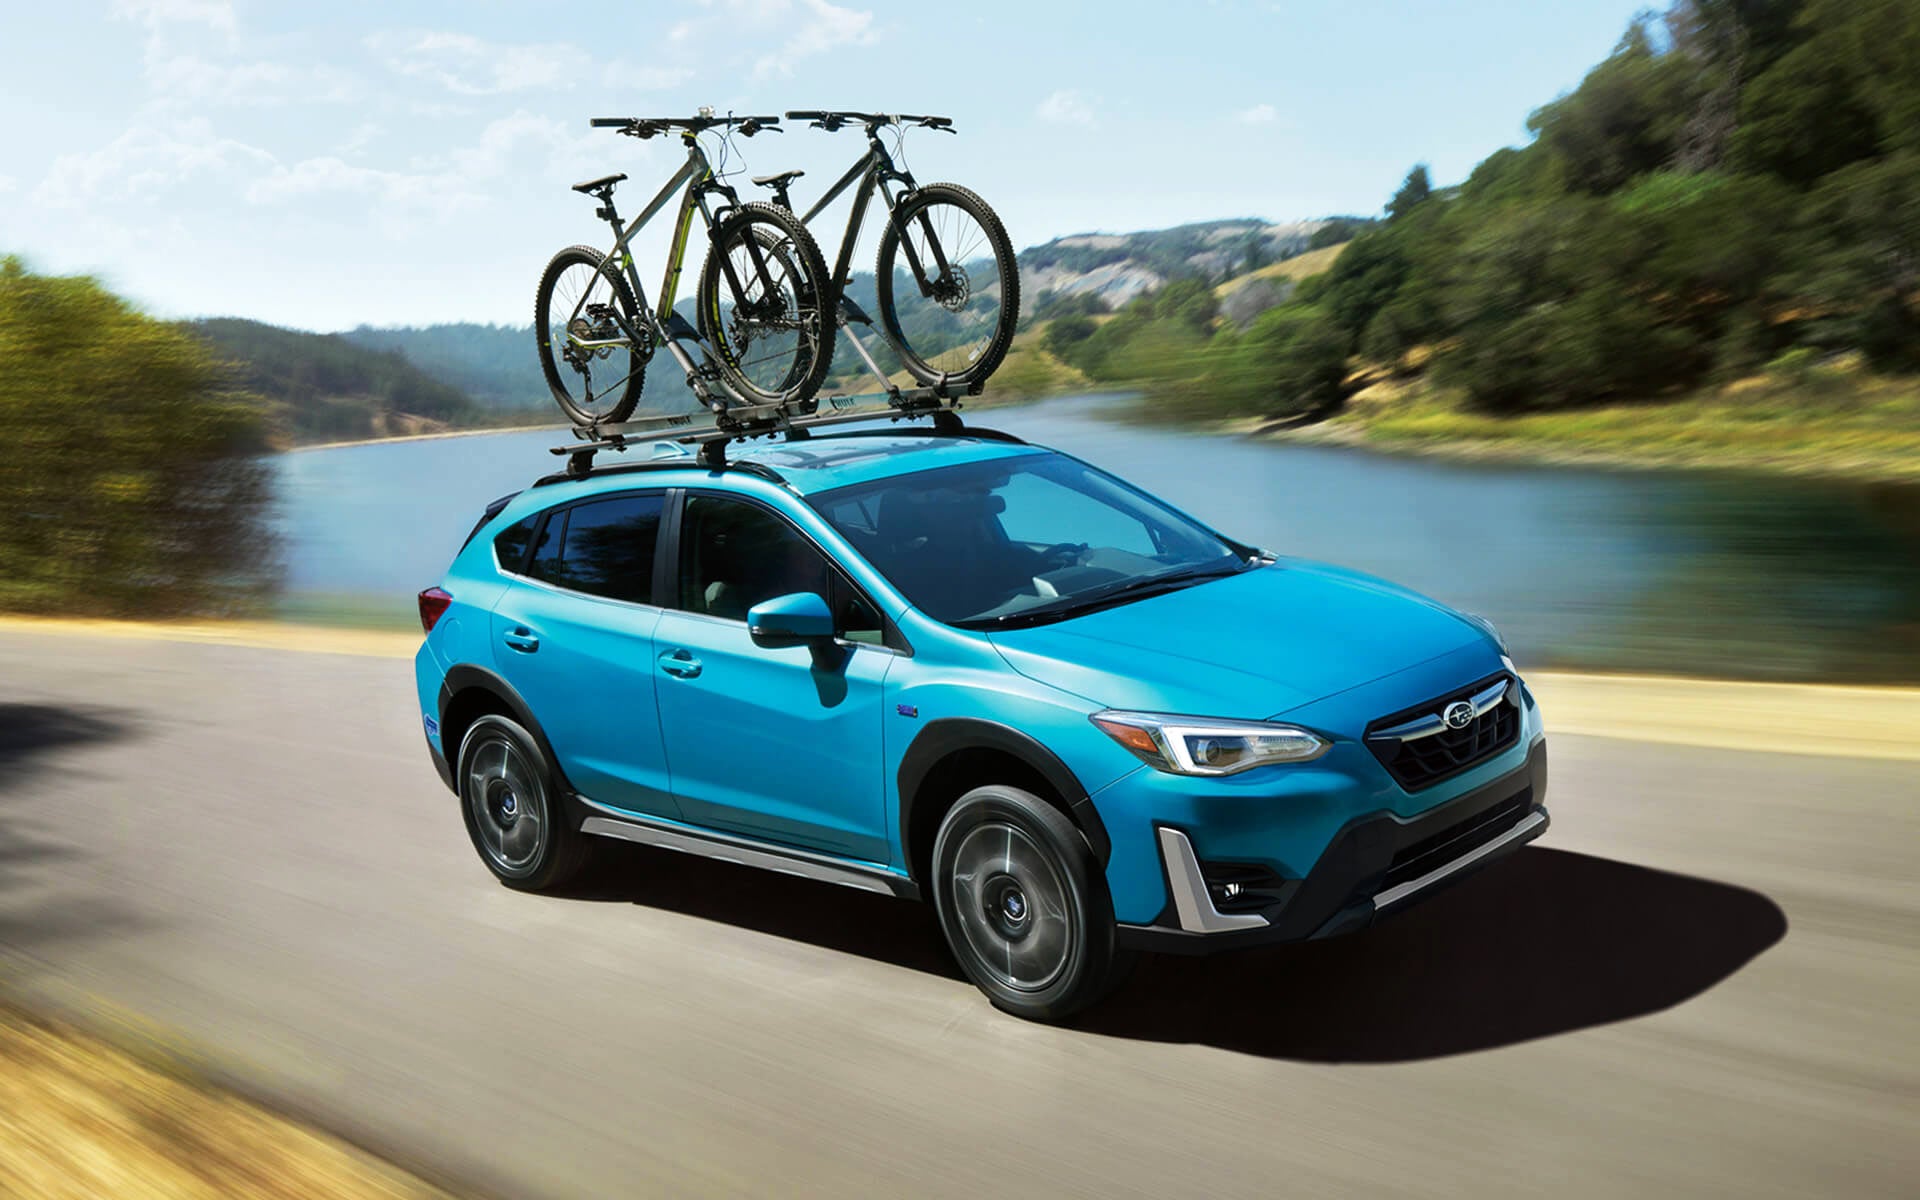 A blue Crosstrek Hybrid with two bicycles on its roof rack driving beside a river | Subaru World of Hackettstown in Hackettstown NJ